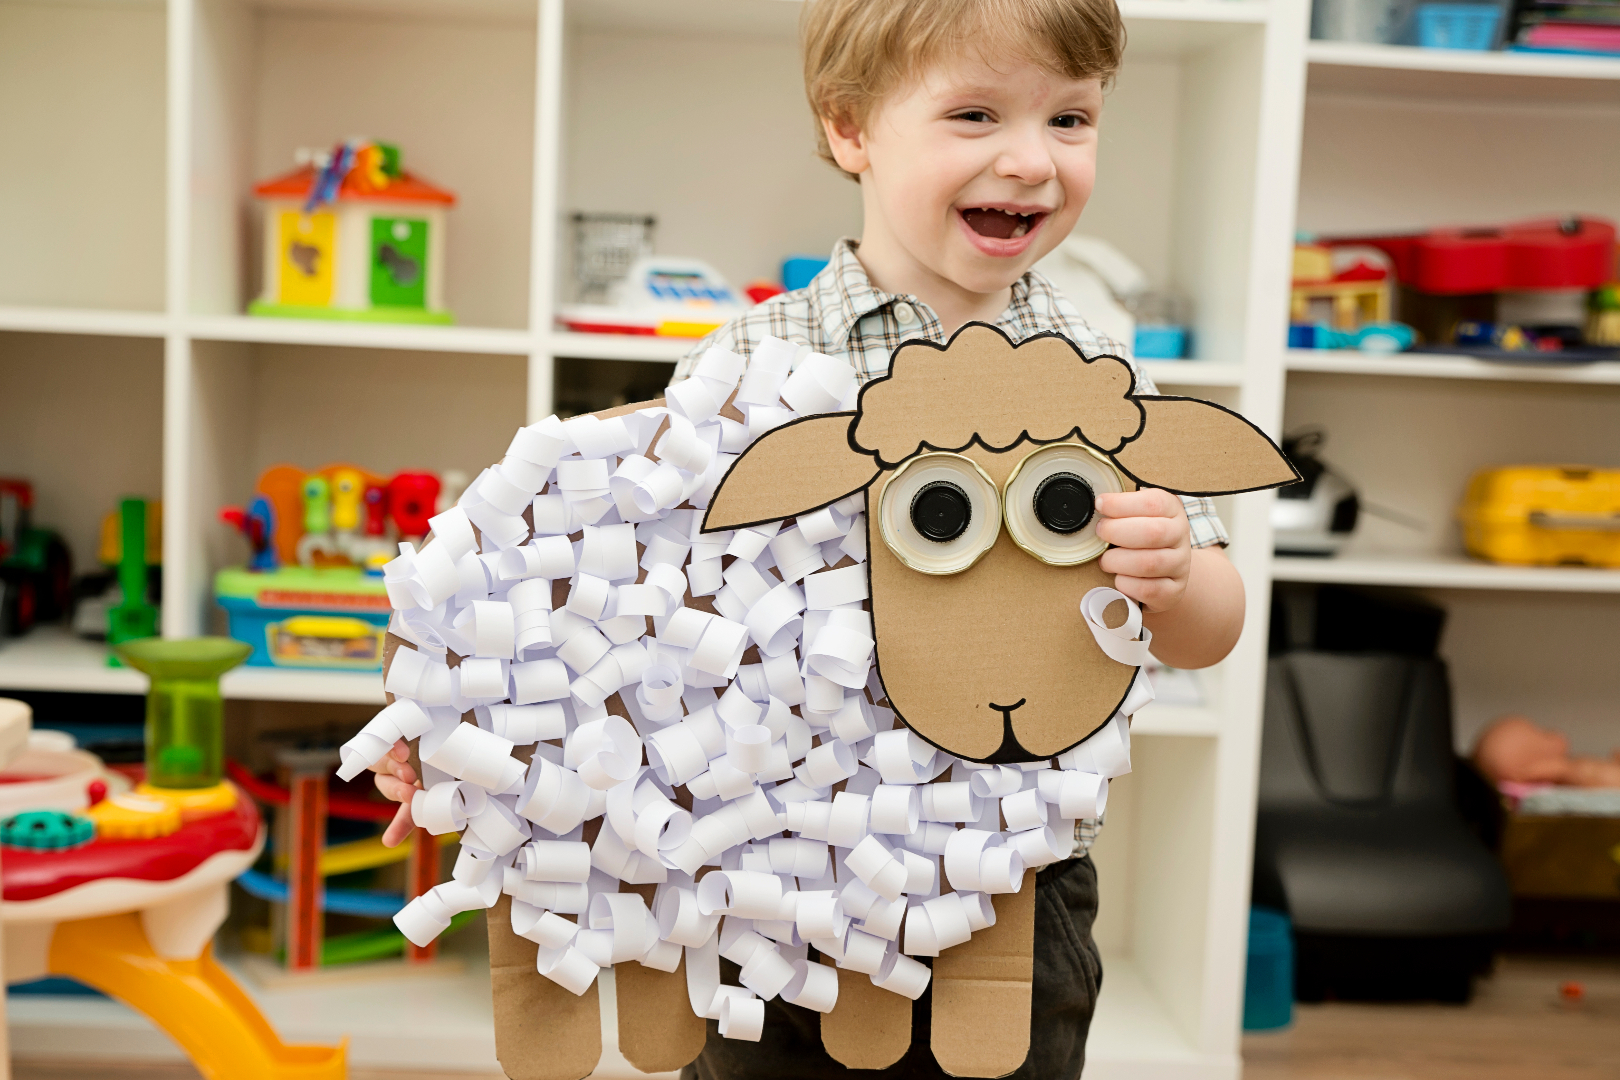 A young boy holds a crafted sheep made of cotton balls and cardboard